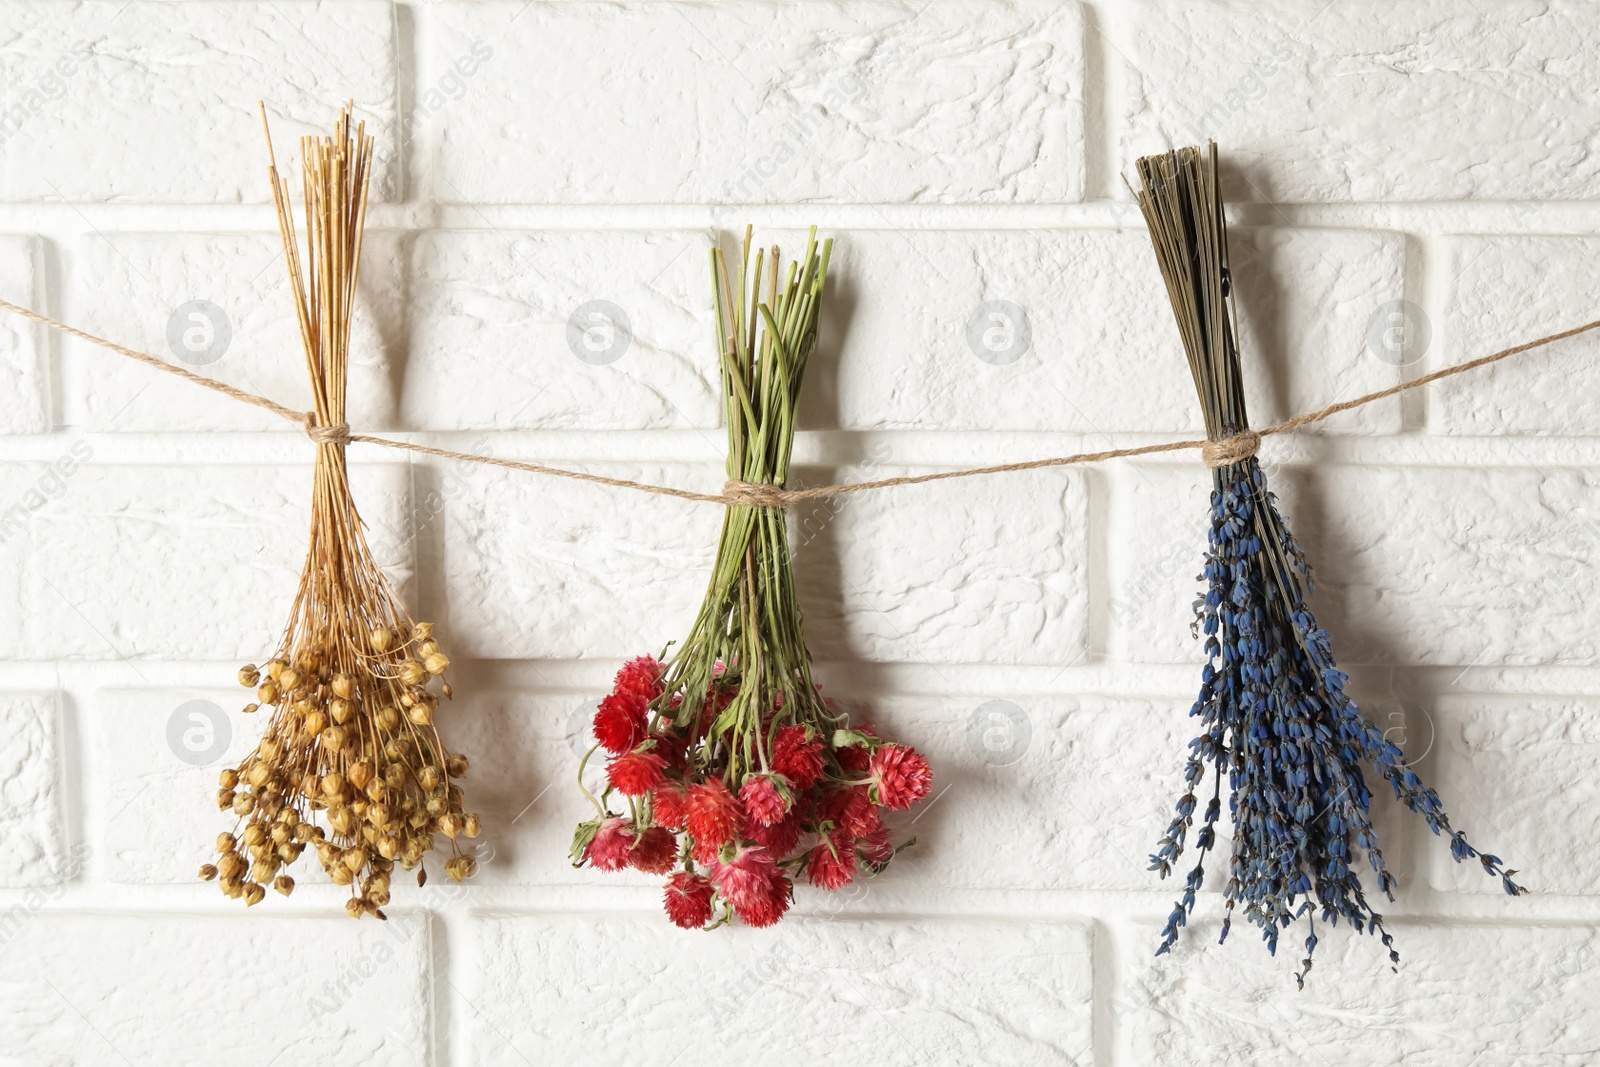 Photo of Bunches of beautiful dried flowers hanging on rope near white brick wall